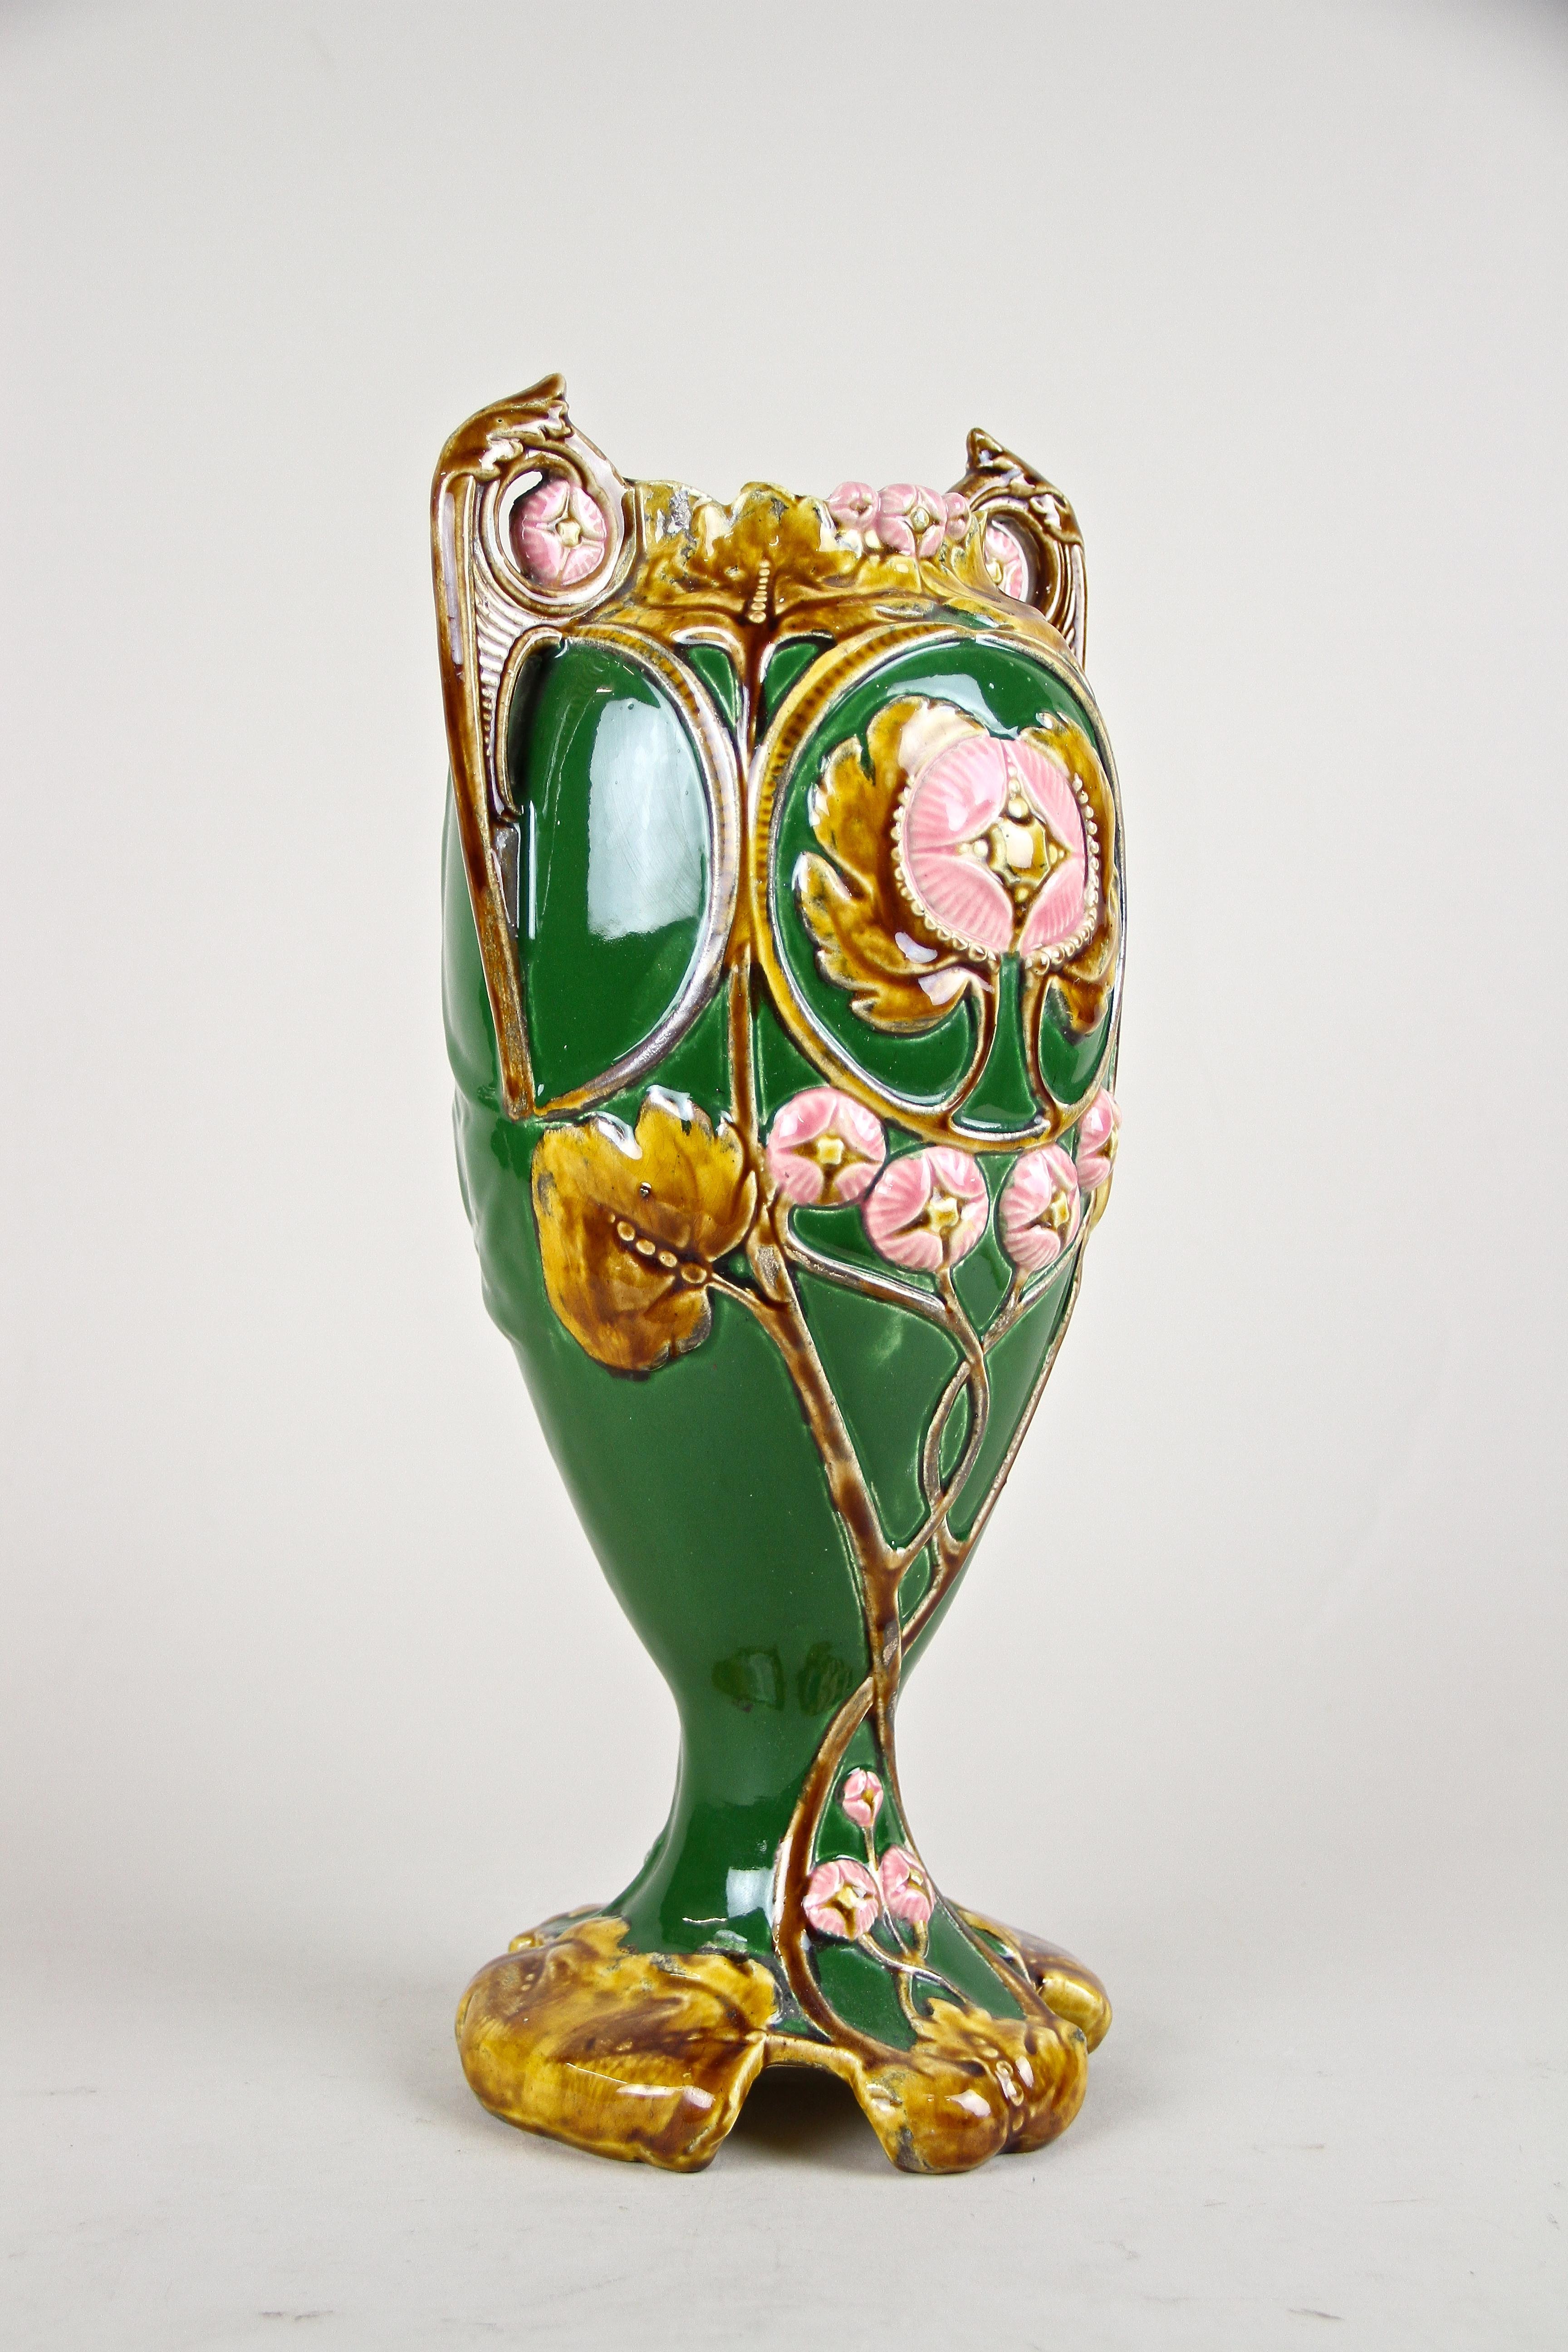 Beautiful Art Nouveau Majolica vase out of France from the early period around 1900 in great untouched, original condition. The unique designed dark green body impresses with an organic shape adorned by a floral theme, showing a lovely coloration in